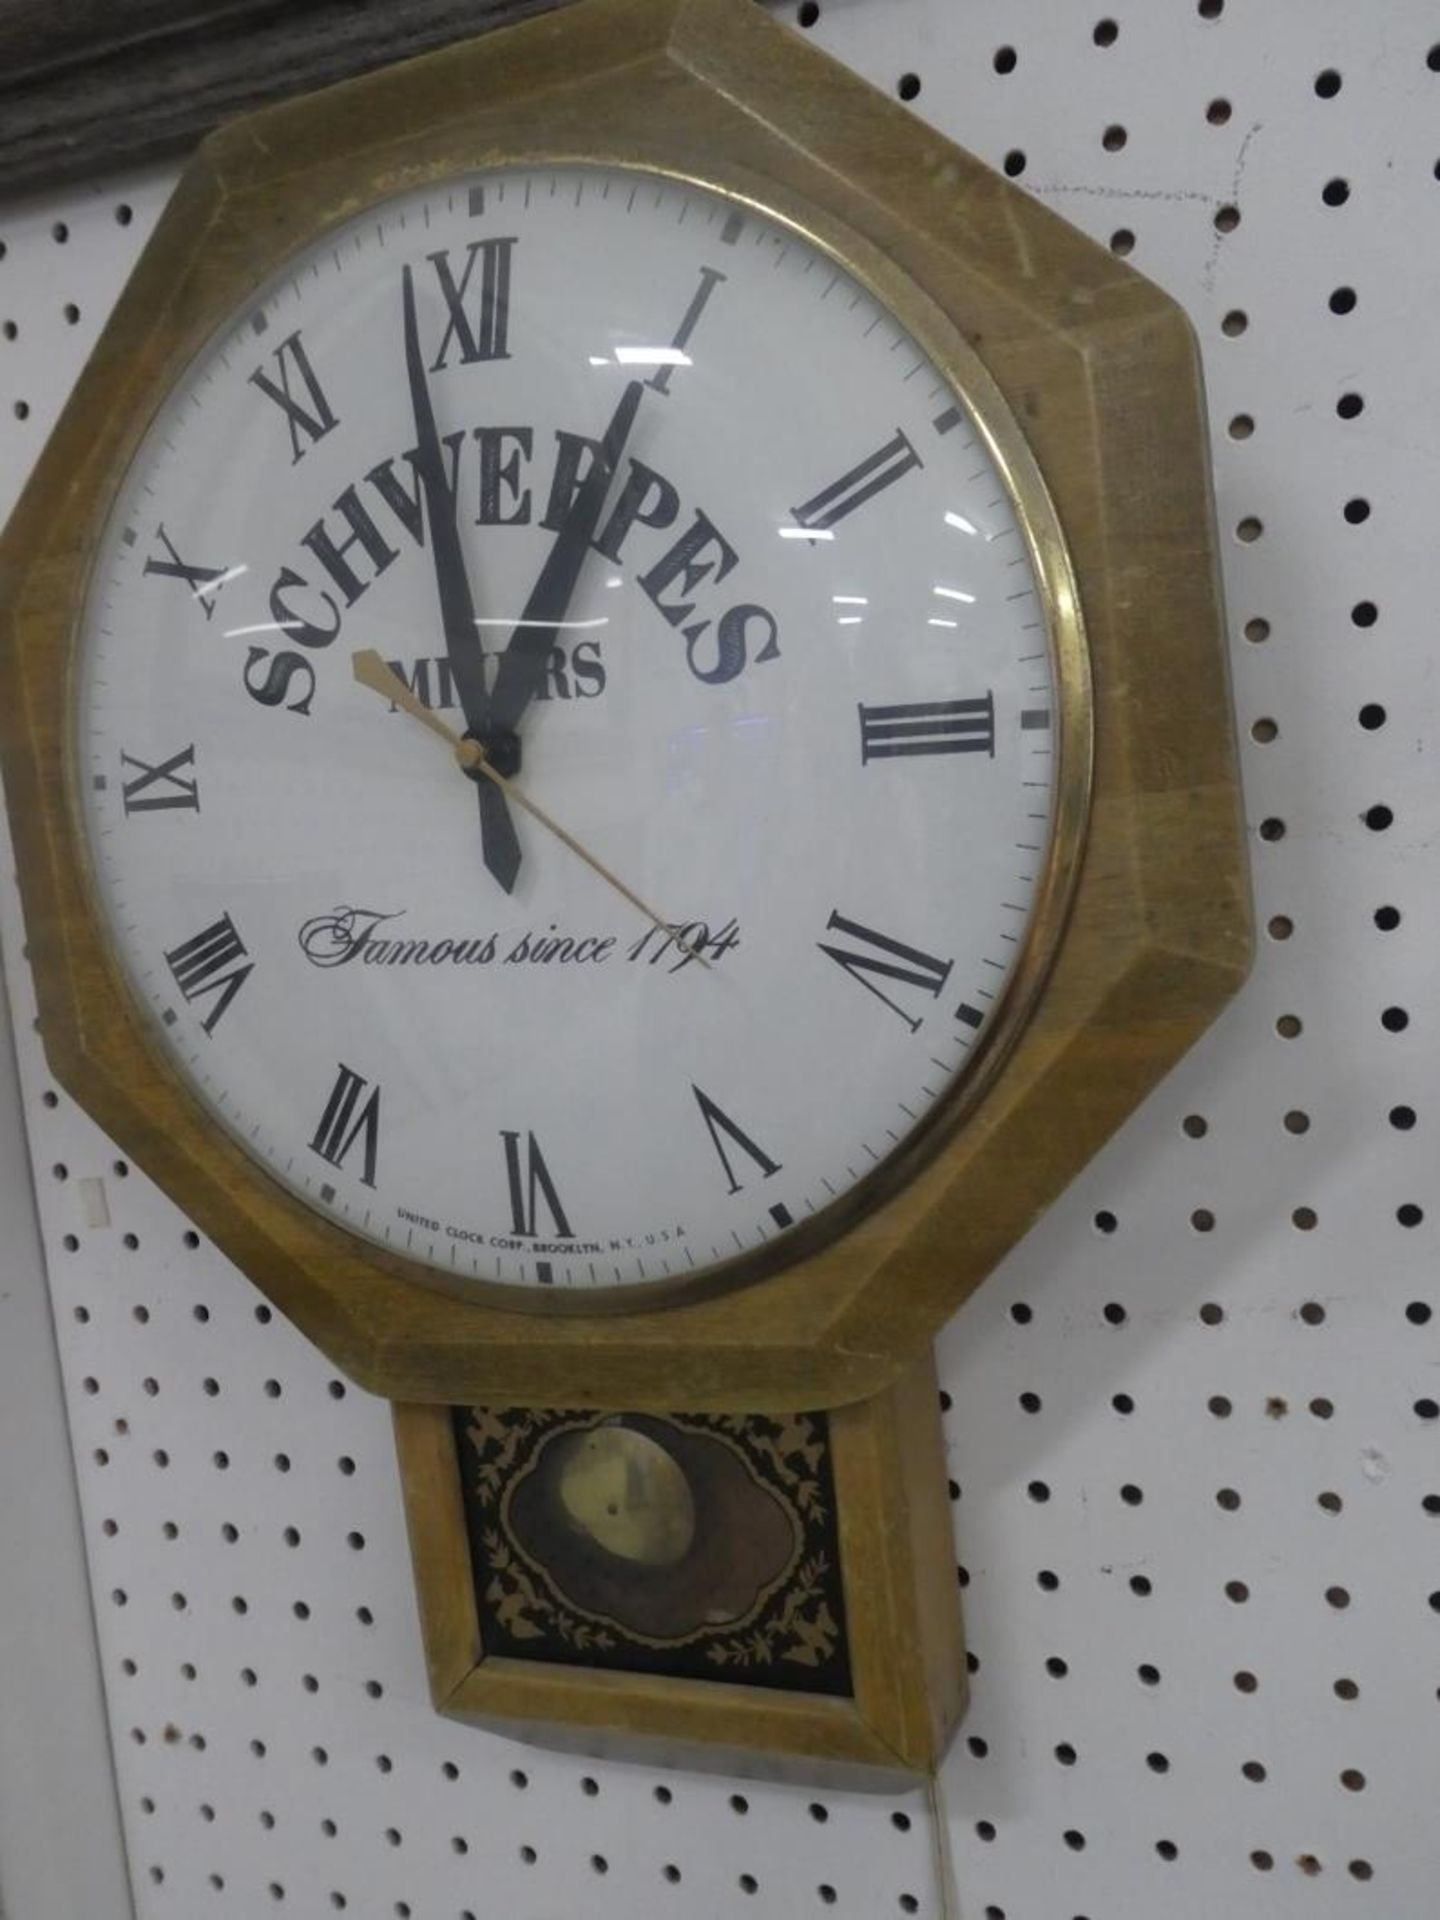 ELECTRIC SCHWEPPES CLOCK (WORKS)